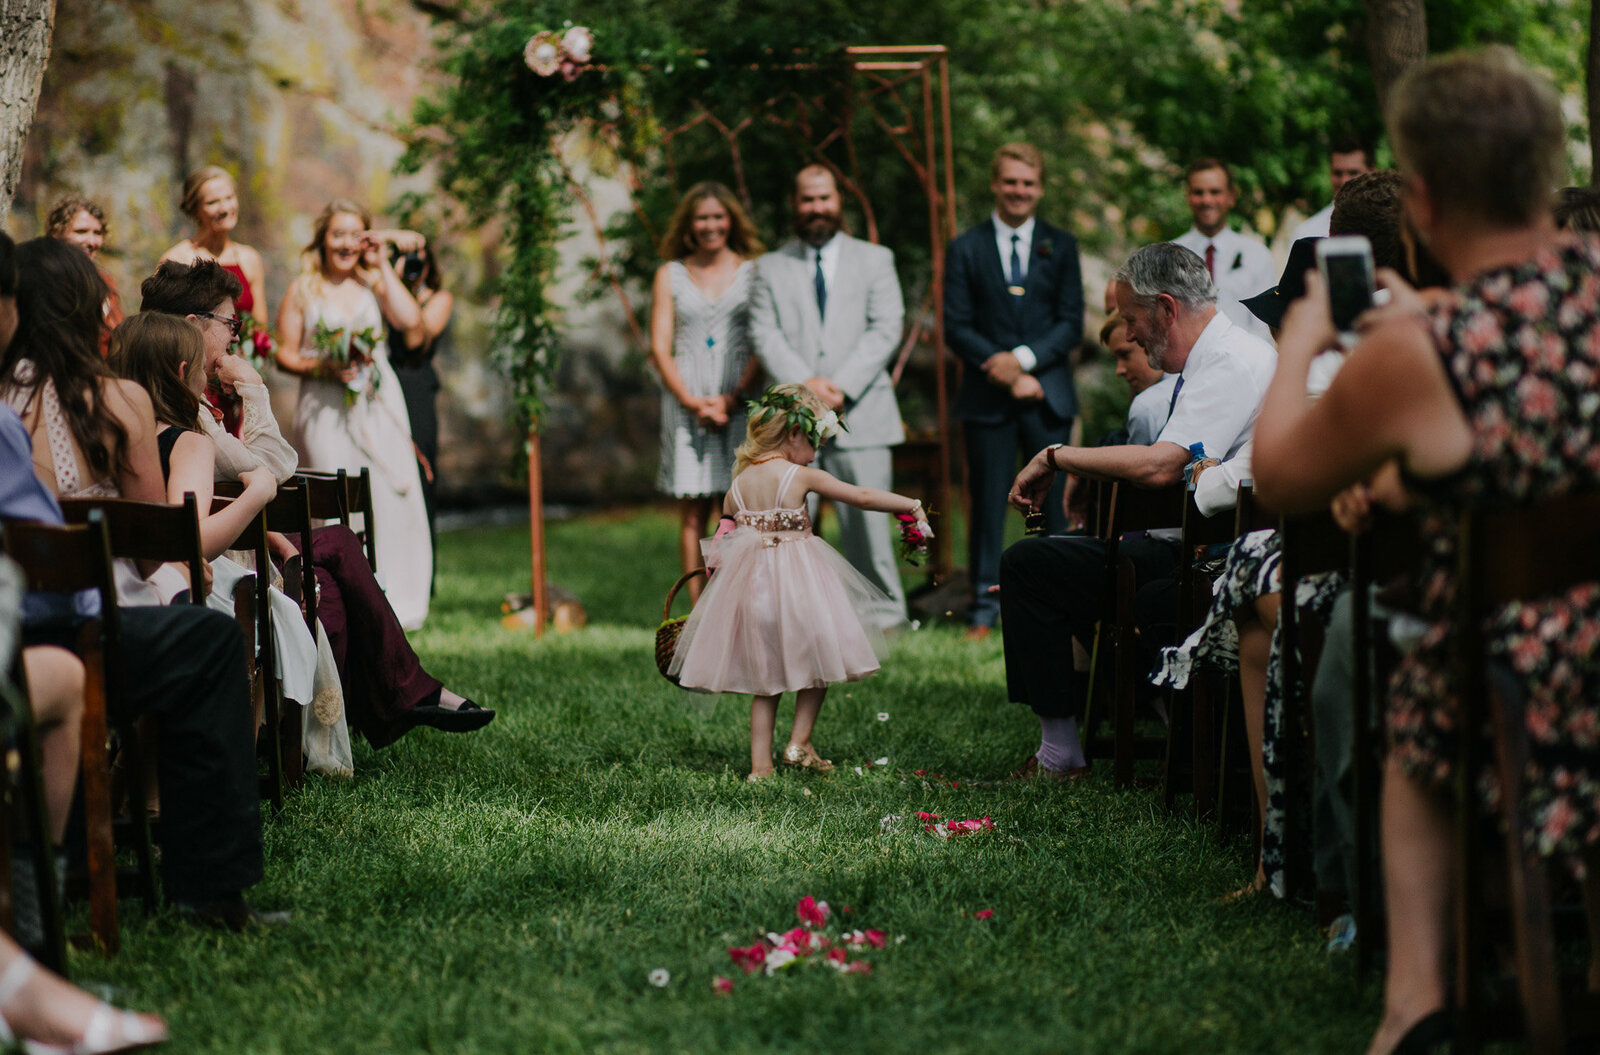 adorable photo of flower girl dropping petals down the grass aisle at planet bluegrass wedding